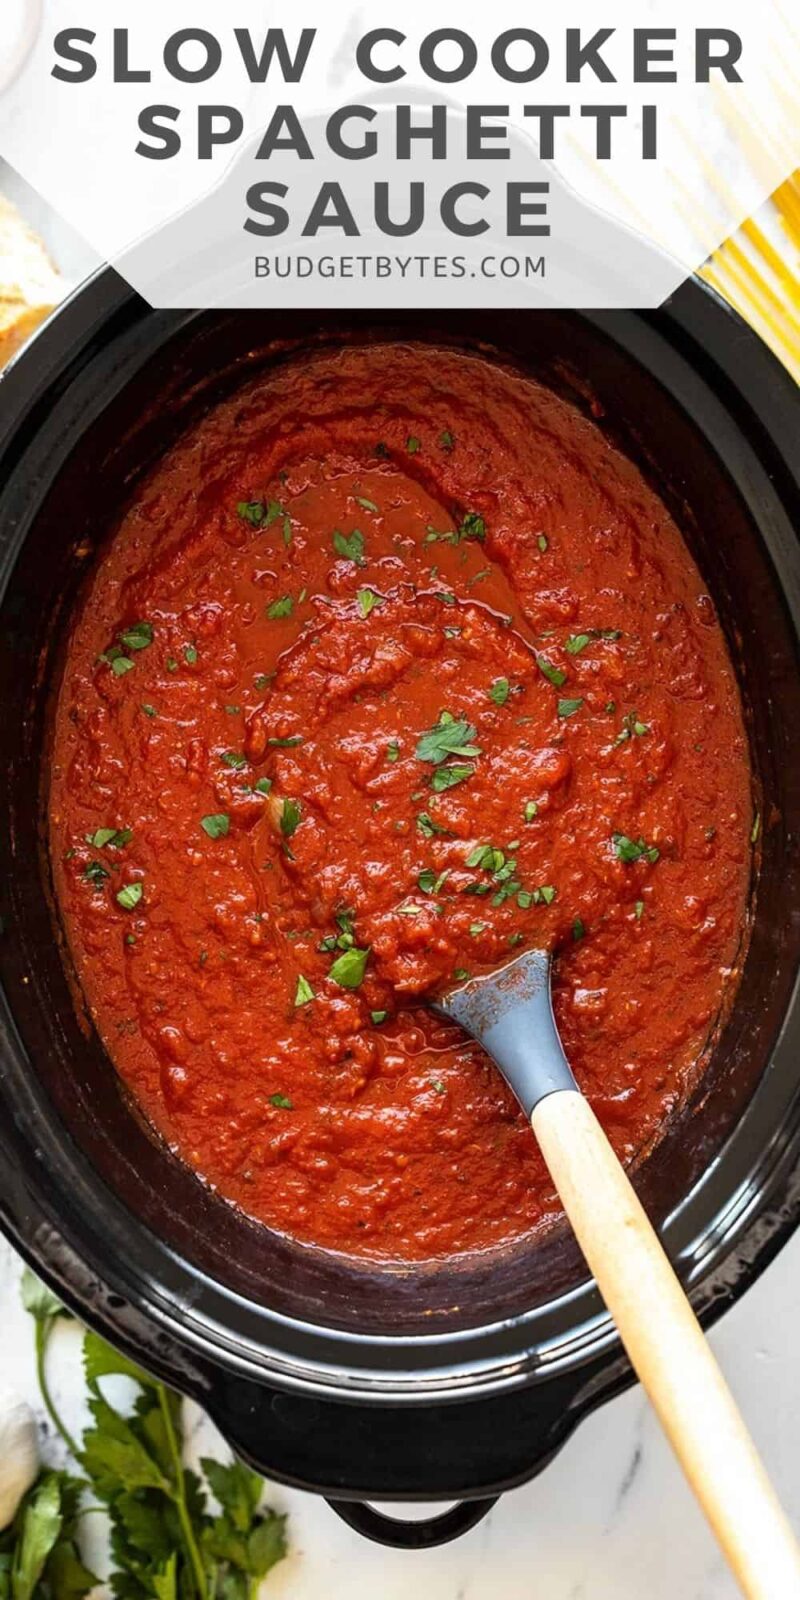 Overhead view of spaghetti sauce in the slow cooker, title text at the top